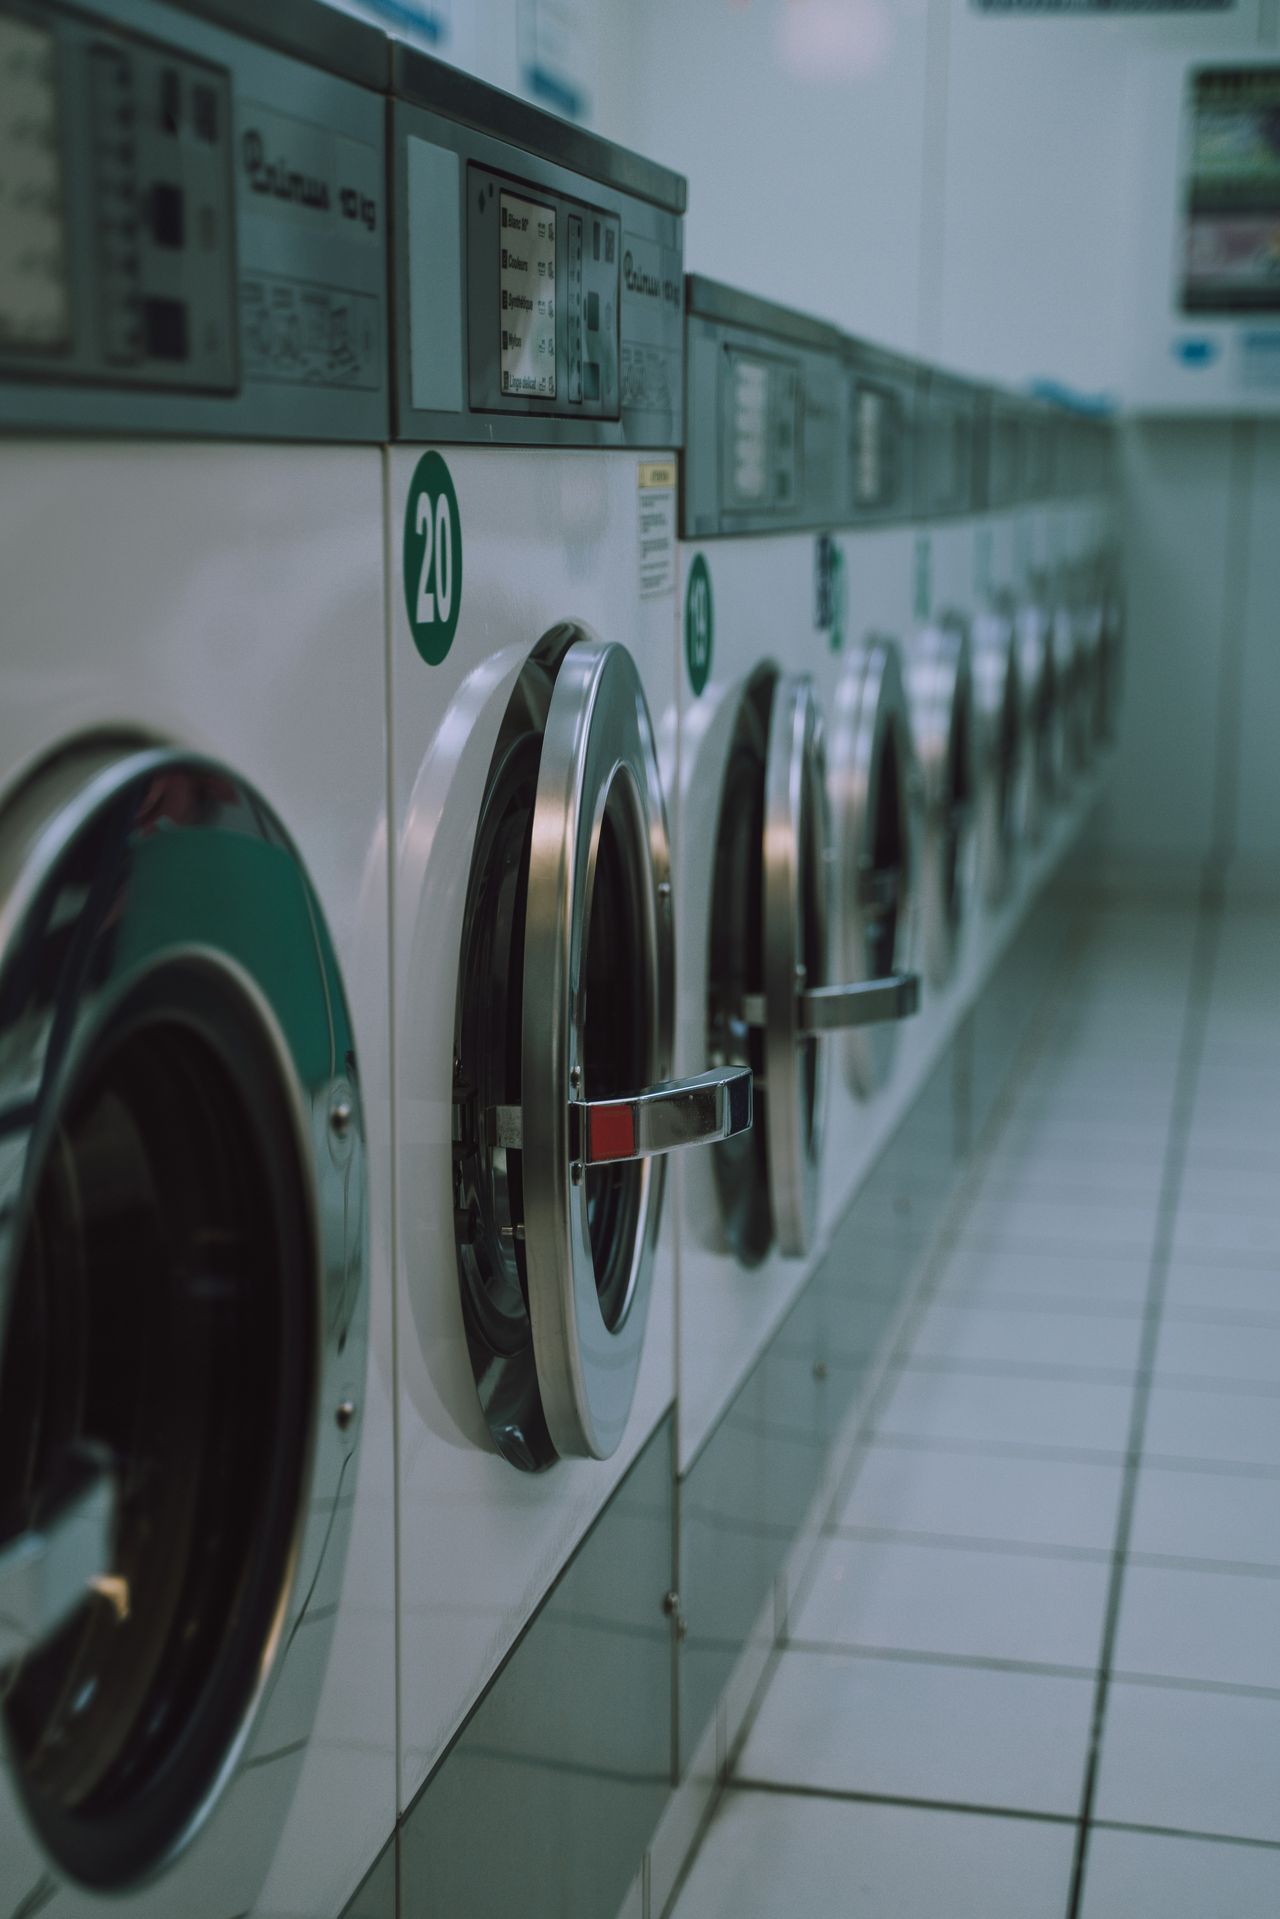 Two students expose major flaw in internet-connected washing machines